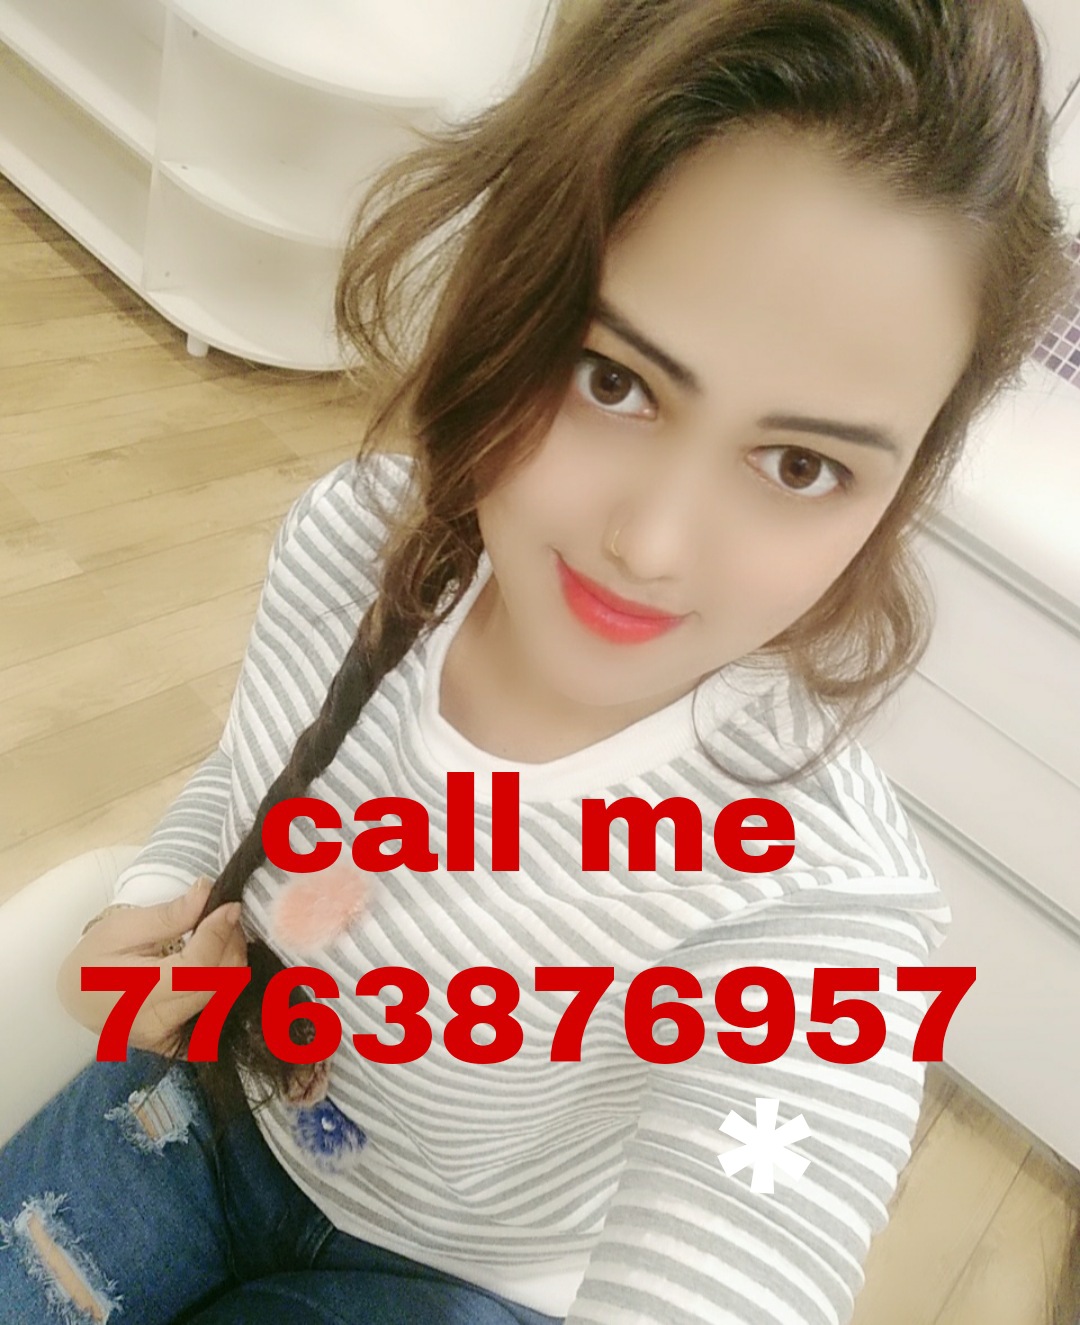 DURG CALL GIRL LOW PRICE CASH PAYMENT SERVICE AVAILABLE 